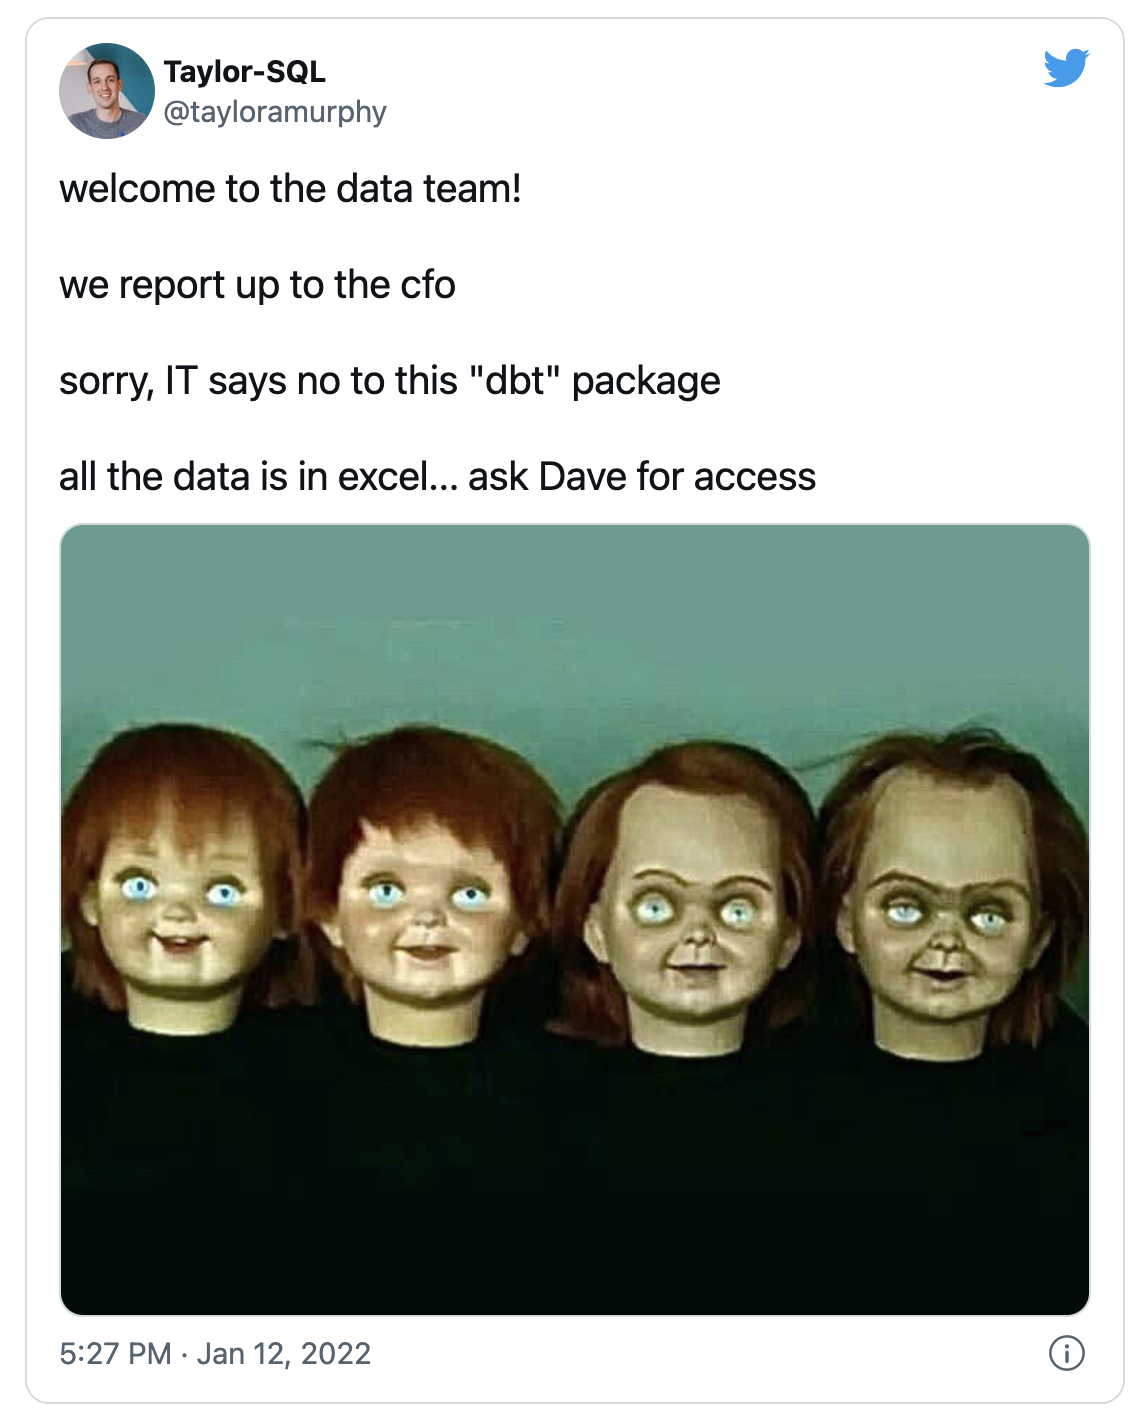 A tweet that features an image of four doll faces, each showing worse physical condition than the previous, reads: "welcome to the data team!

we report up to the cfo

sorry, IT says no to this dbt package

all the data is in excel... ask Dave for access"